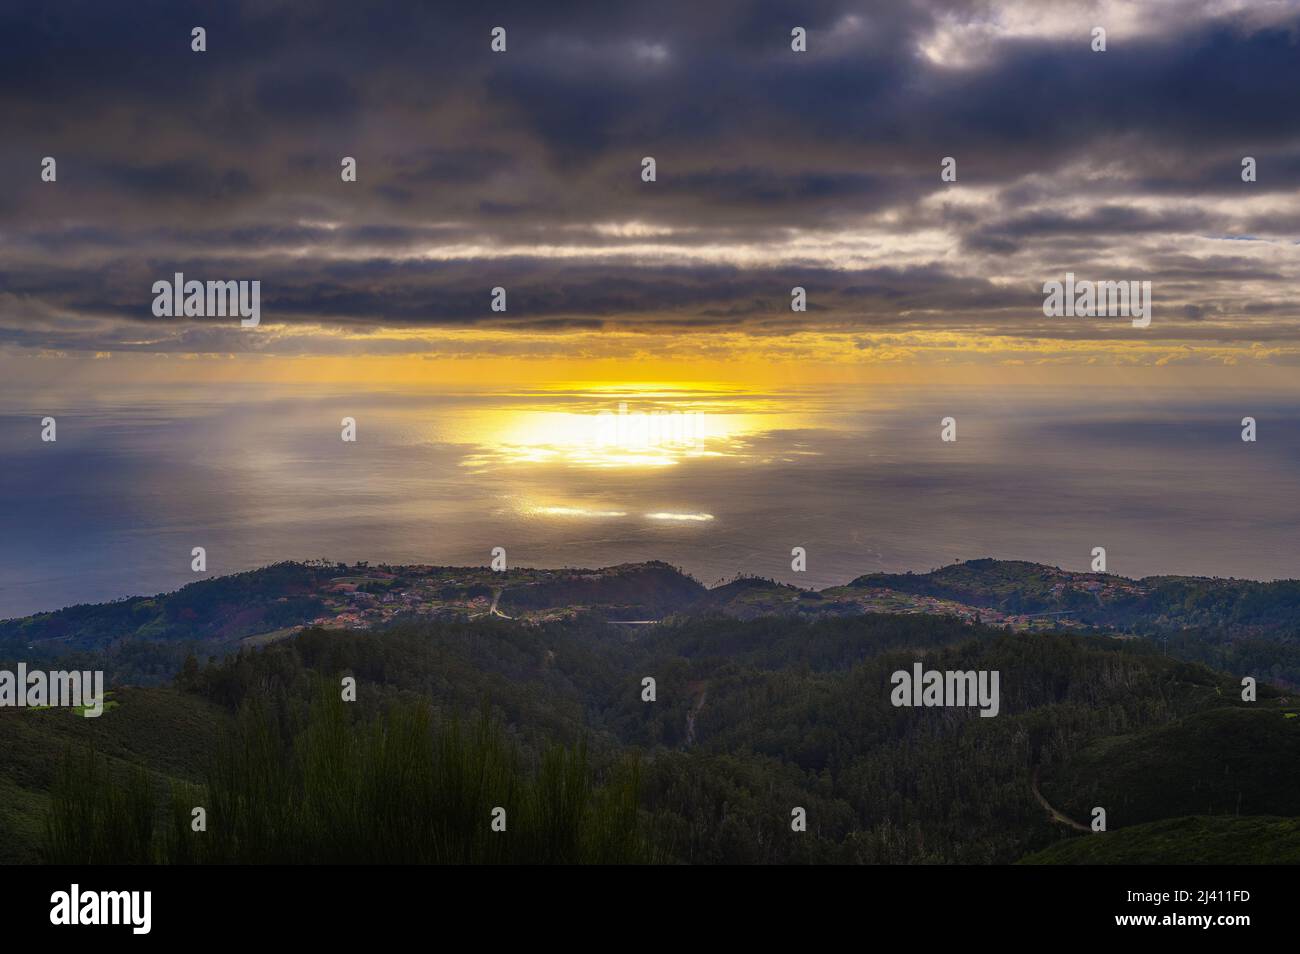 Sunset over Atlantic Ocean with coastal villages in Madeira, Portugal Stock Photo